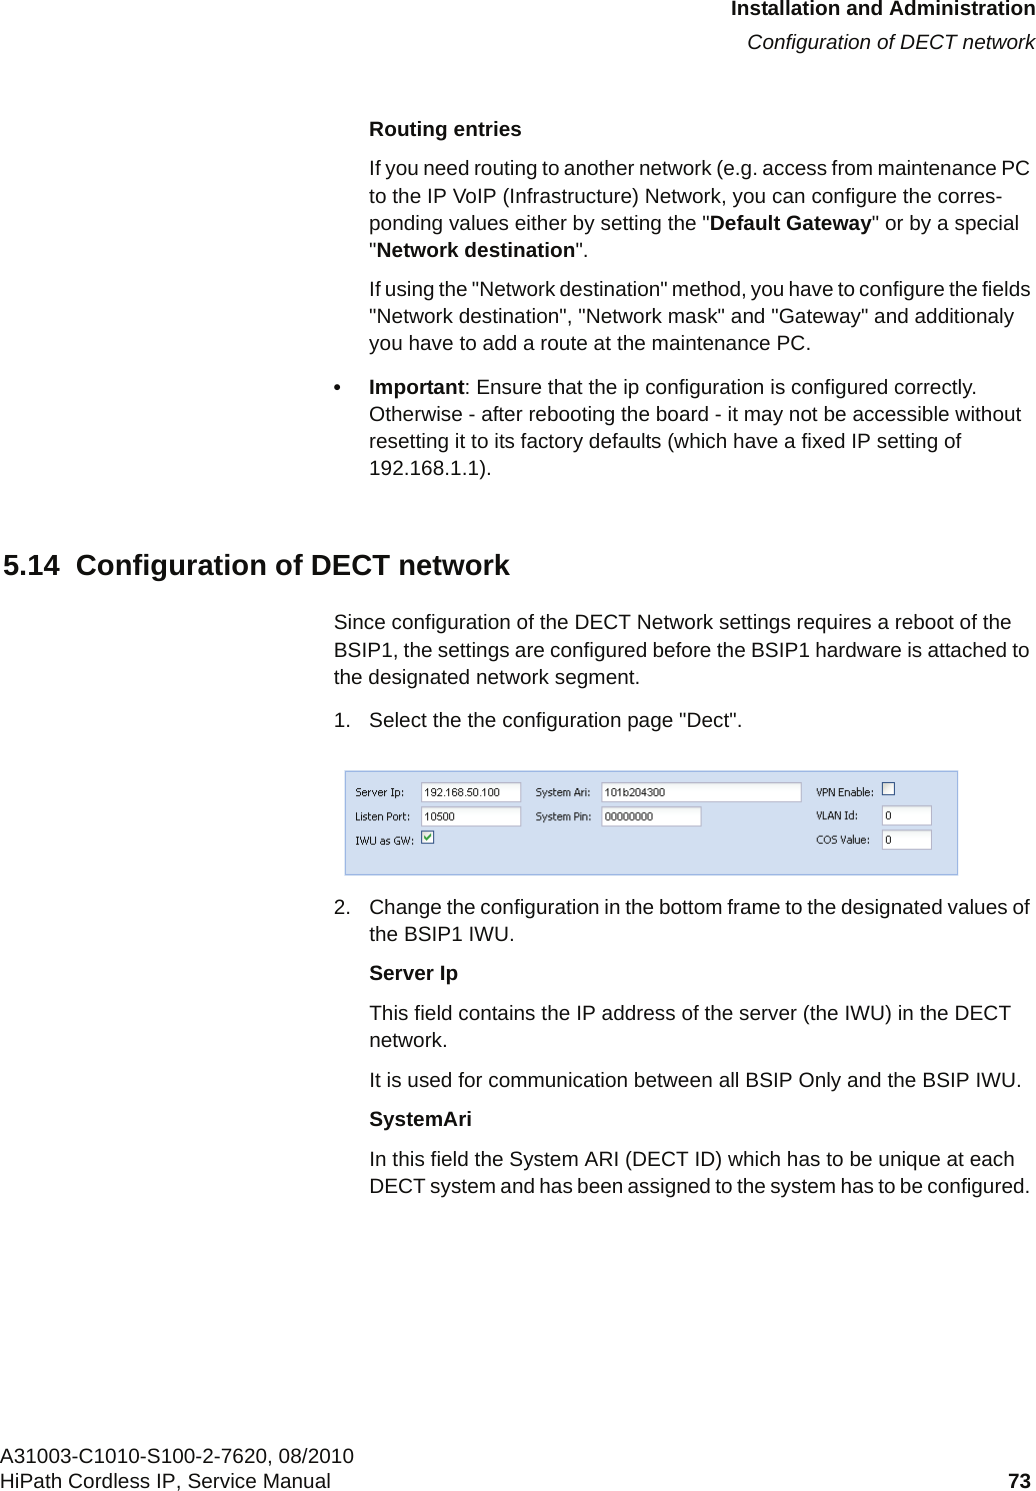 c05_ikon.fmInstallation and AdministrationConfiguration of DECT networkA31003-C1010-S100-2-7620, 08/2010HiPath Cordless IP, Service Manual 73           Routing entriesIf you need routing to another network (e.g. access from maintenance PC to the IP VoIP (Infrastructure) Network, you can configure the corres-ponding values either by setting the &quot;Default Gateway&quot; or by a special &quot;Network destination&quot;. If using the &quot;Network destination&quot; method, you have to configure the fields &quot;Network destination&quot;, &quot;Network mask&quot; and &quot;Gateway&quot; and additionaly you have to add a route at the maintenance PC.• Important: Ensure that the ip configuration is configured correctly. Otherwise - after rebooting the board - it may not be accessible without resetting it to its factory defaults (which have a fixed IP setting of 192.168.1.1).5.14  Configuration of DECT networkSince configuration of the DECT Network settings requires a reboot of the BSIP1, the settings are configured before the BSIP1 hardware is attached to the designated network segment.1. Select the the configuration page &quot;Dect&quot;. 2. Change the configuration in the bottom frame to the designated values of the BSIP1 IWU.Server IpThis field contains the IP address of the server (the IWU) in the DECT network. It is used for communication between all BSIP Only and the BSIP IWU.SystemAriIn this field the System ARI (DECT ID) which has to be unique at each DECT system and has been assigned to the system has to be configured. 